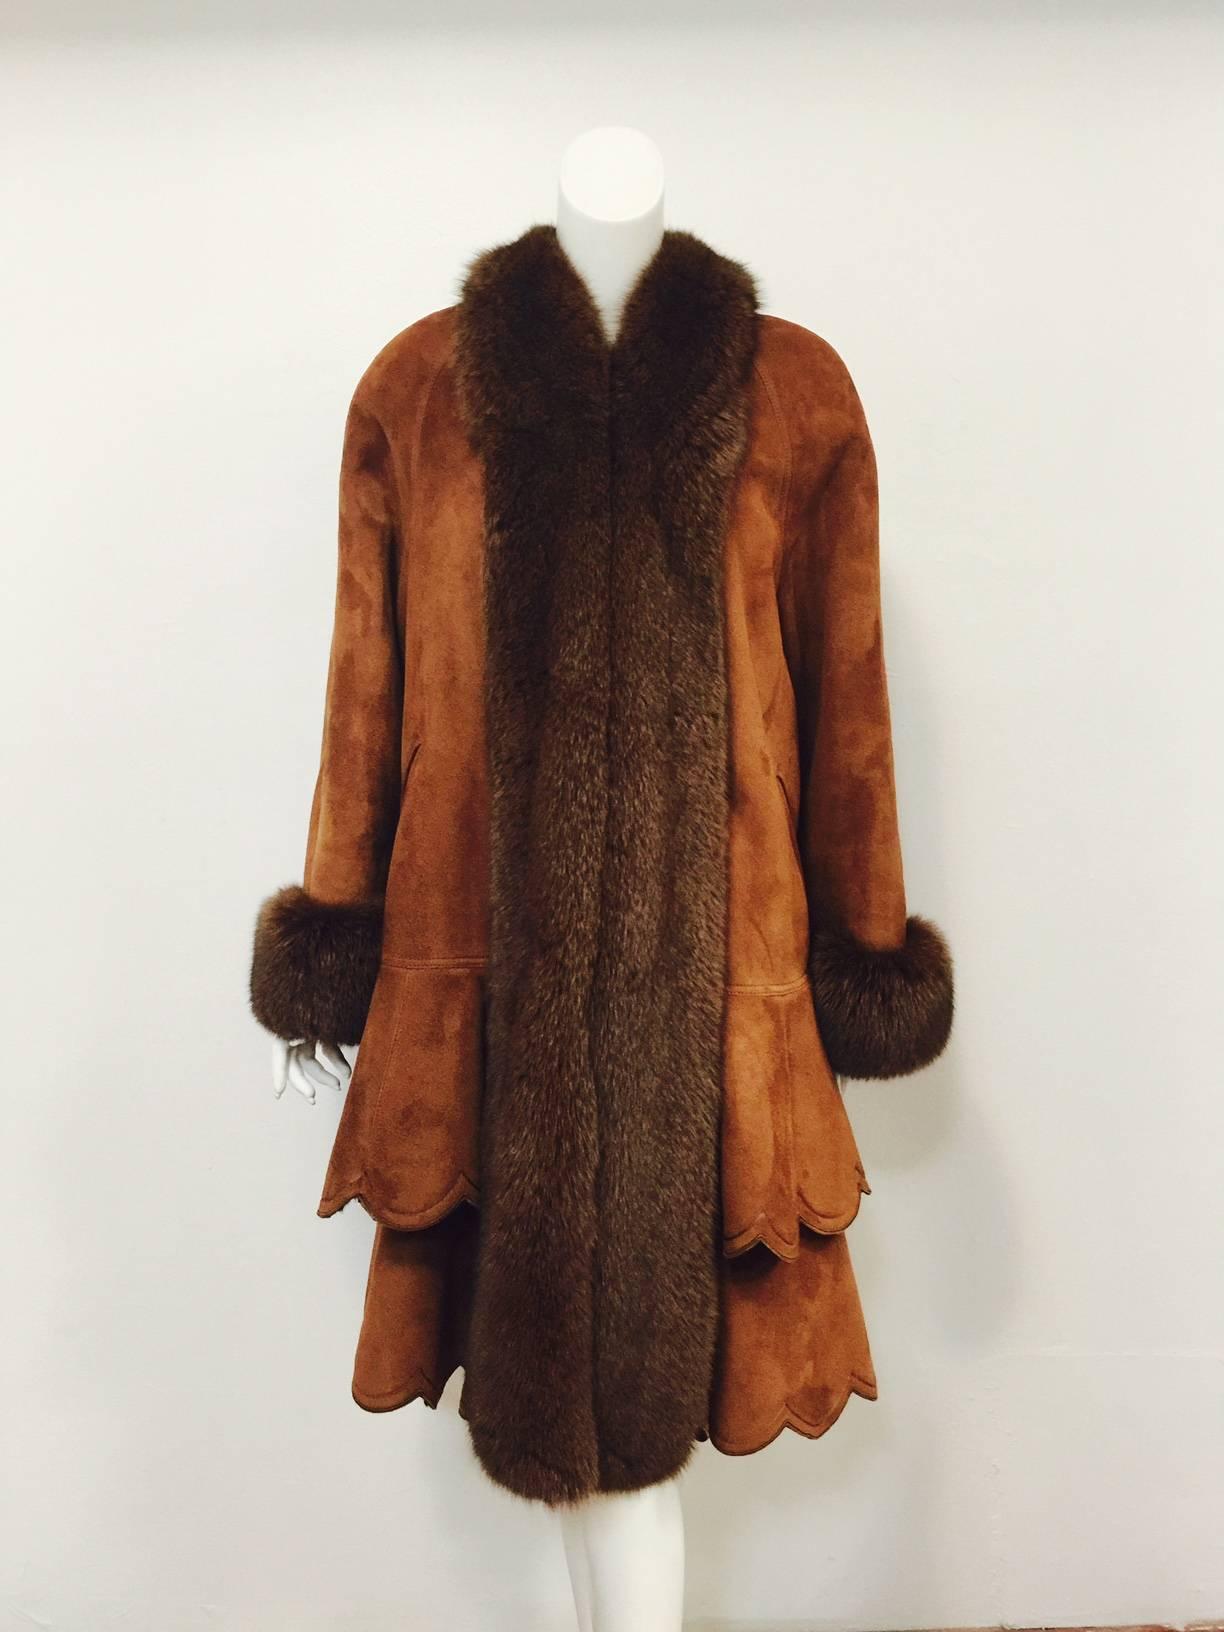 Christia Cognac Shearling Coat With Fox Trim takes full advantage of superior materials and exalted craftsmanship!  Featuring uber-feminine swing silhouette, this stunning shearling is perfectly complemented by beautiful brown fox tuxedo collar and